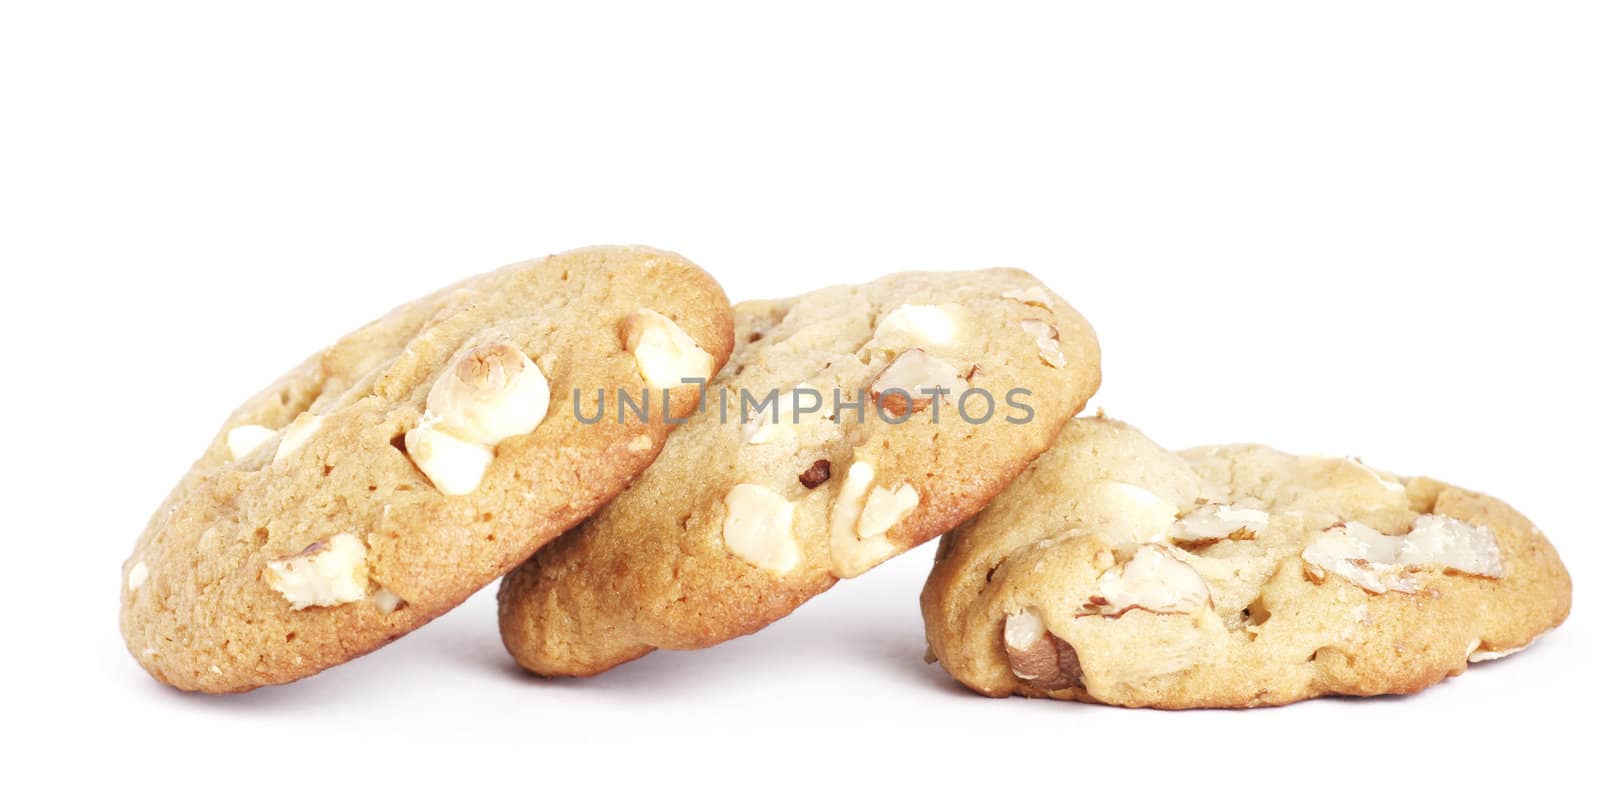 Three  Cookie Biscuits With White Chocolate And Macadamia Nuts, Plain Background